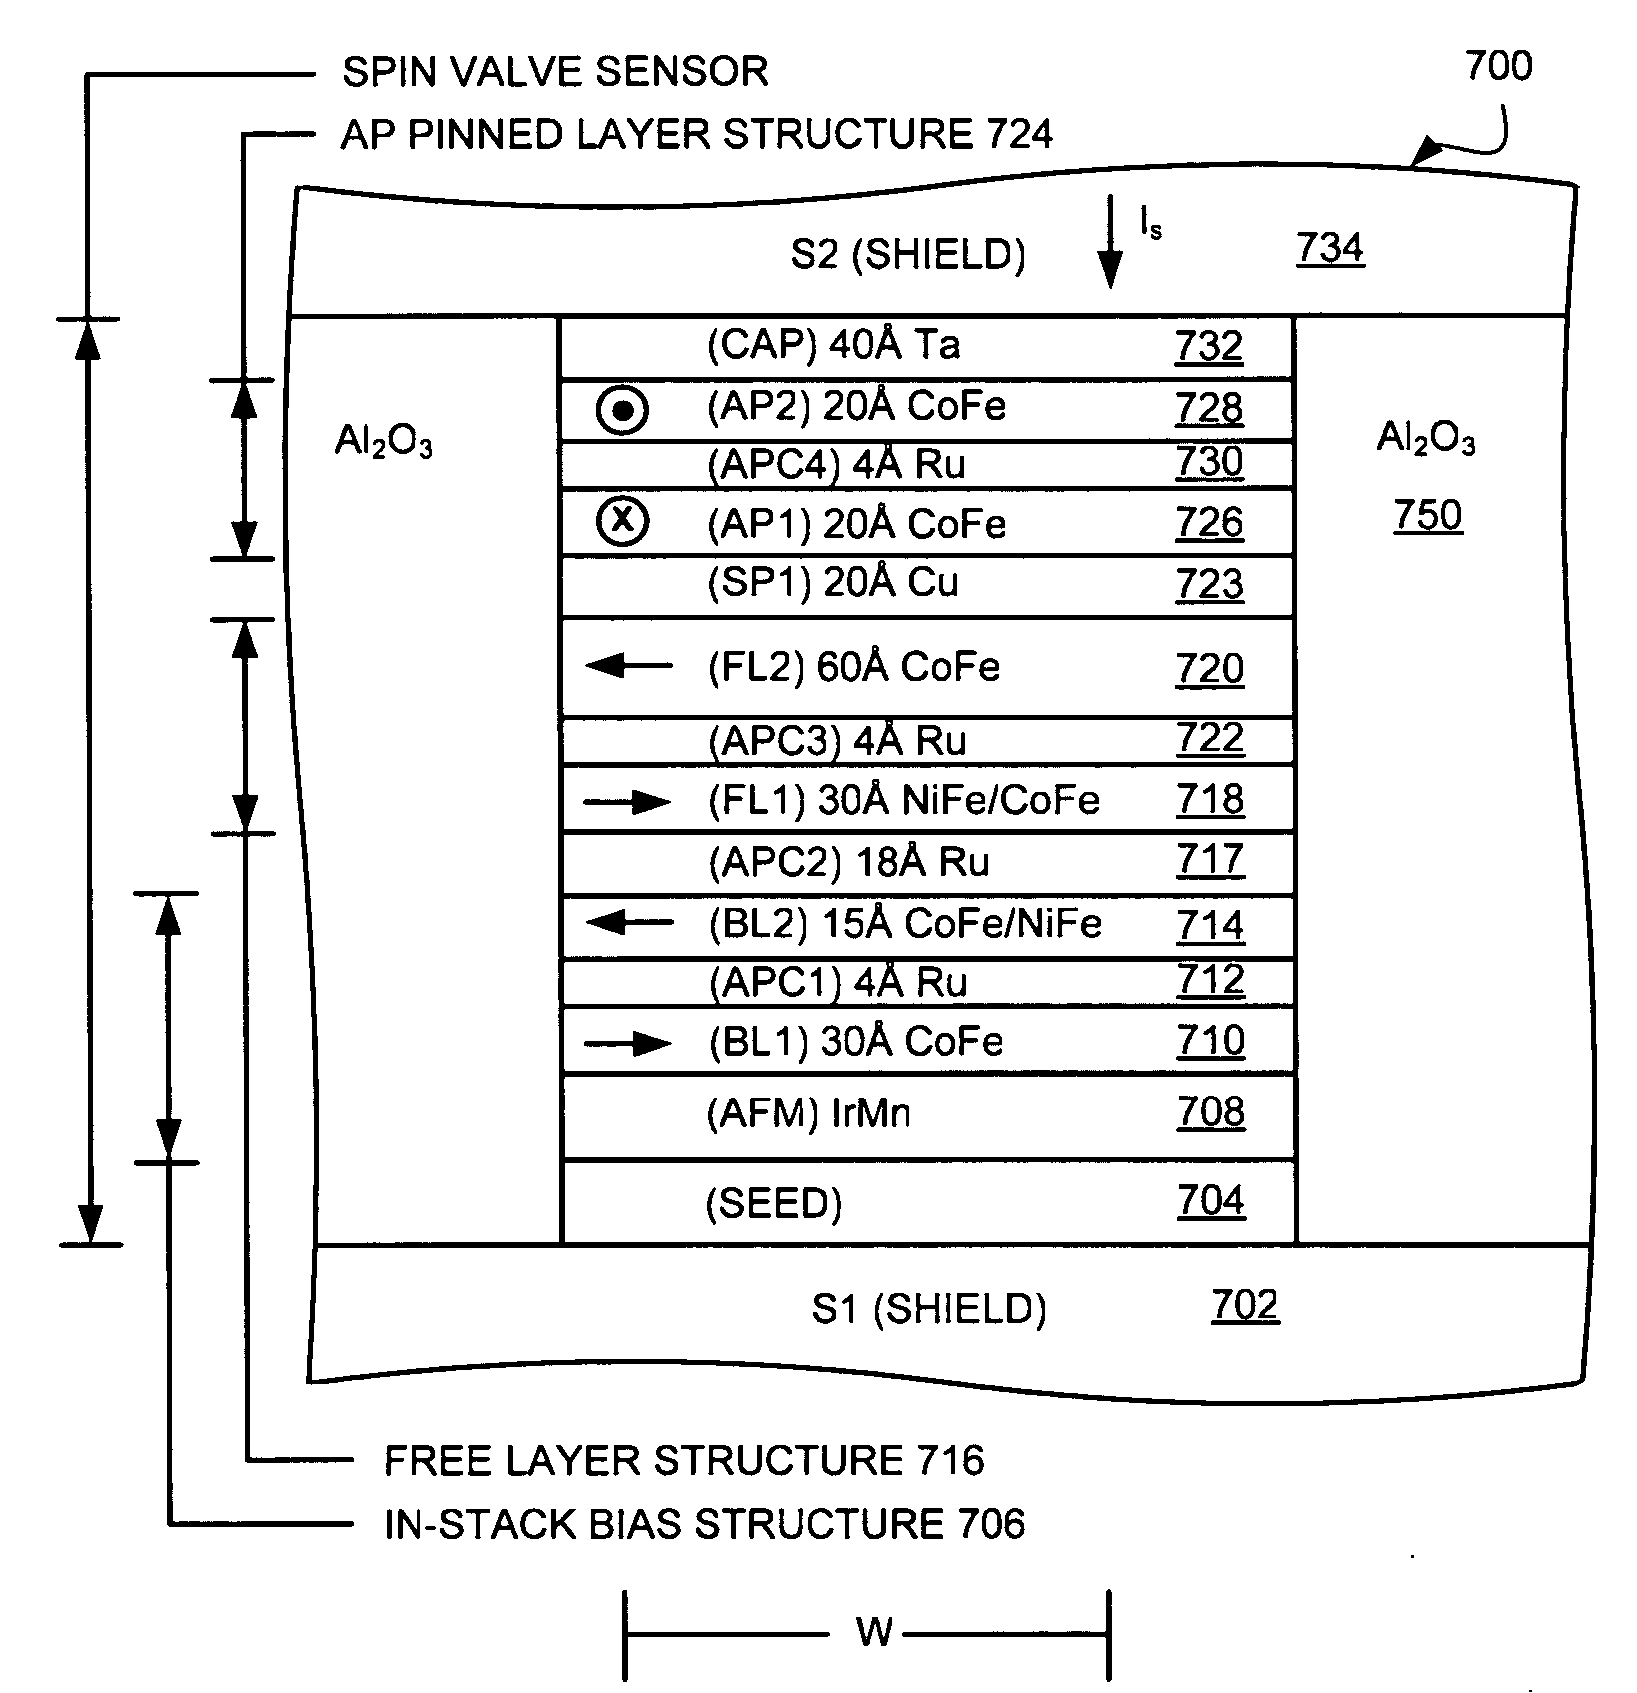 Sensor with in-stack bias structure providing enhanced magnetostatic stabilization